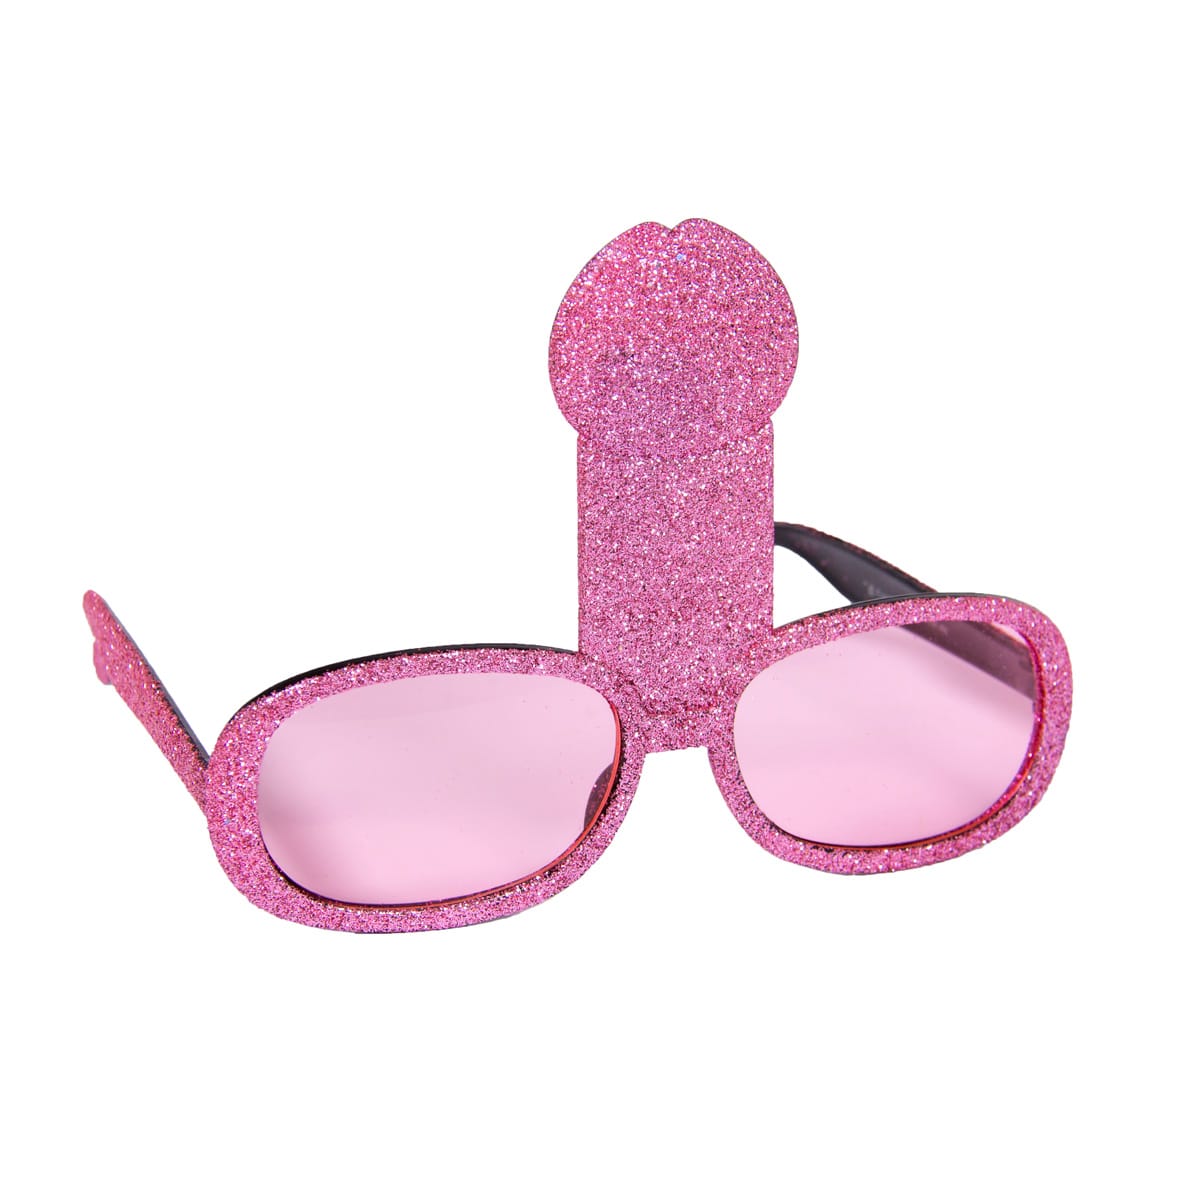 Penis party glasses pink glitter.